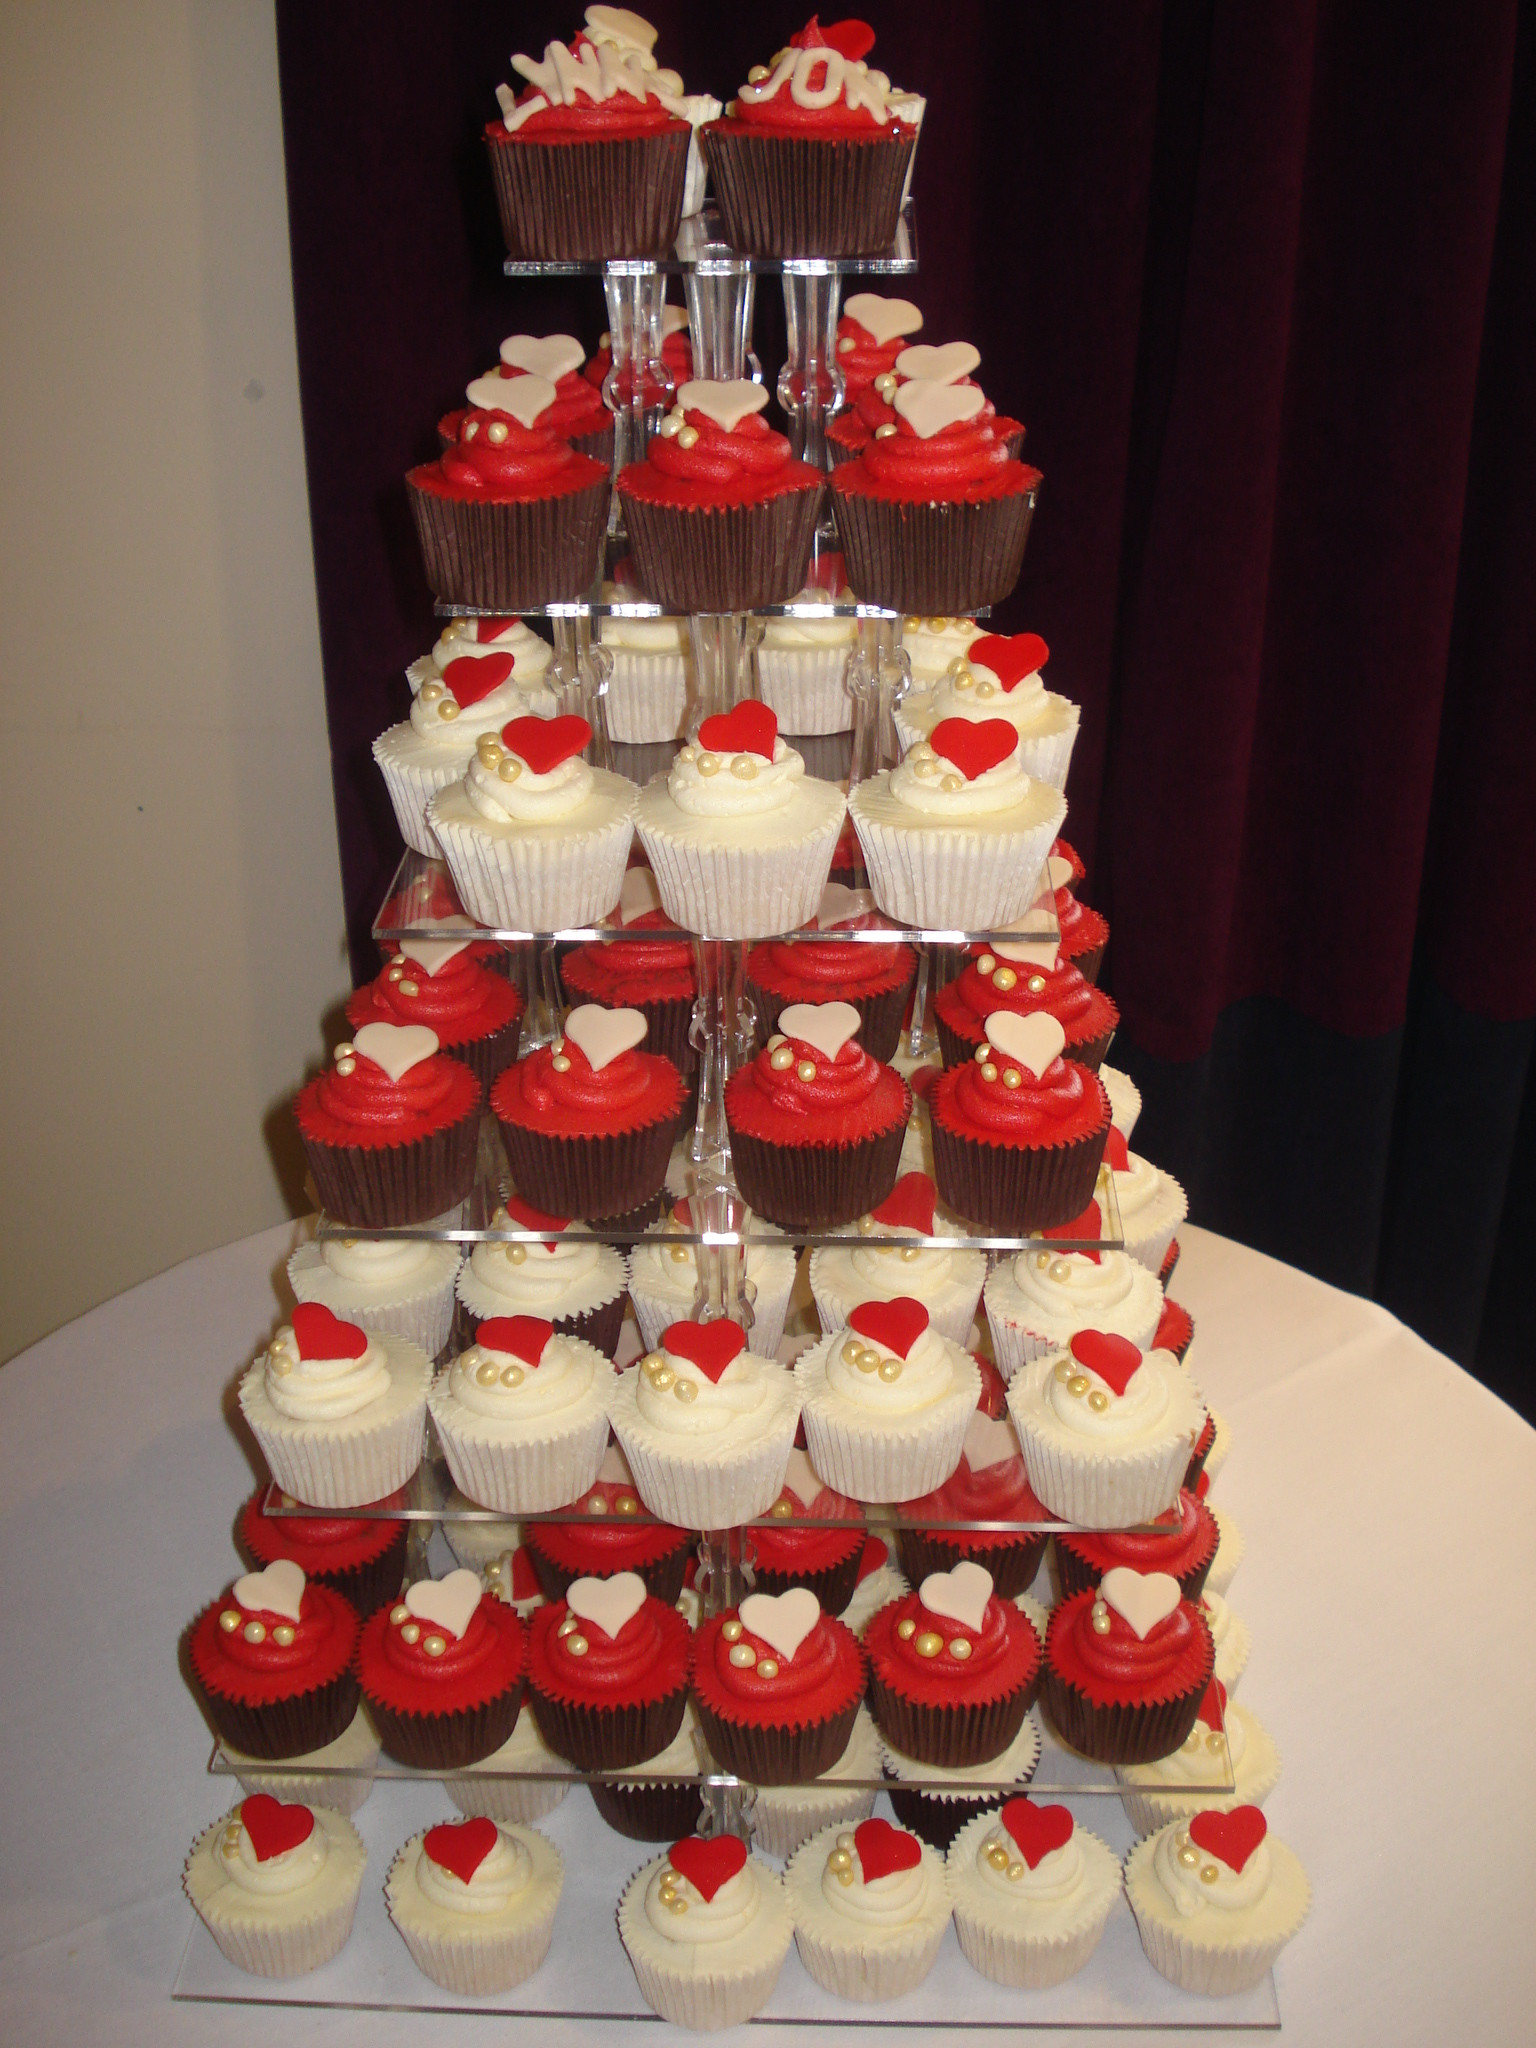 Wedding Cupcakes Decorations
 Chinese red and ivory wedding cupcakes – CAKES BY LIZZIE